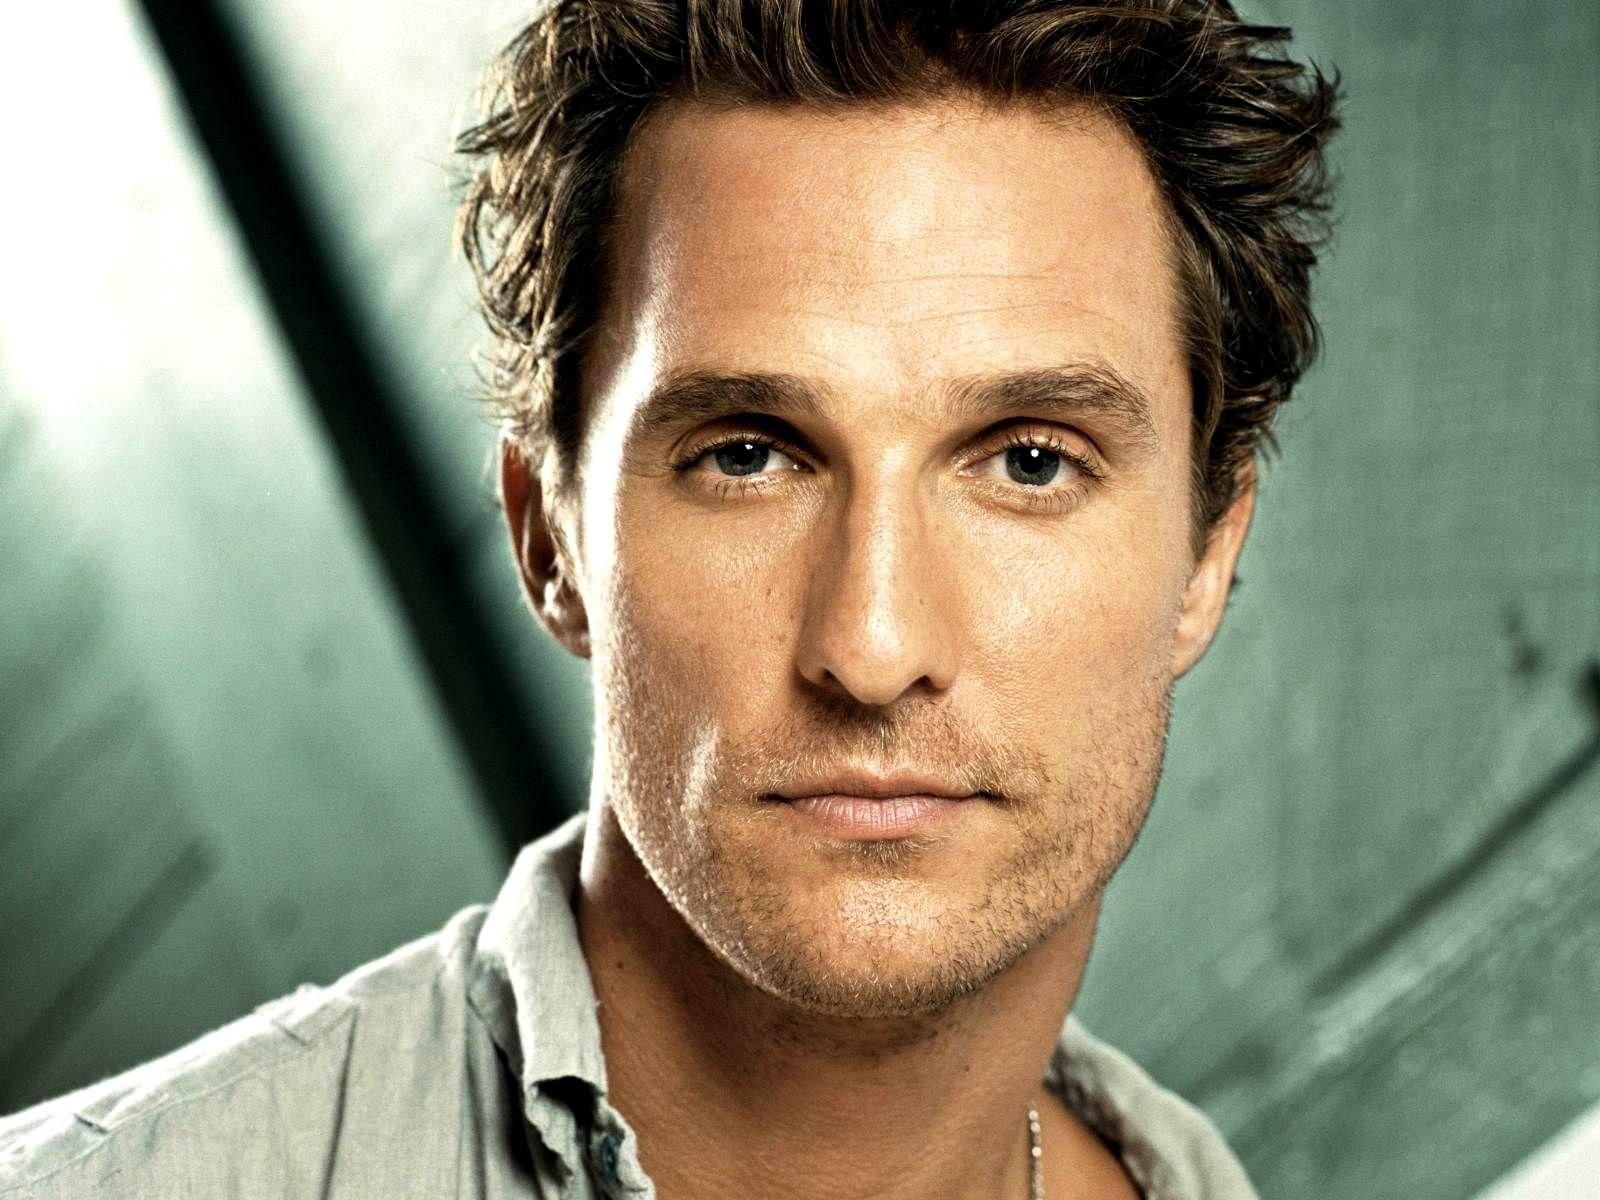 ‘I’m open to Marvel and DC movies’: Matthew McConaughey